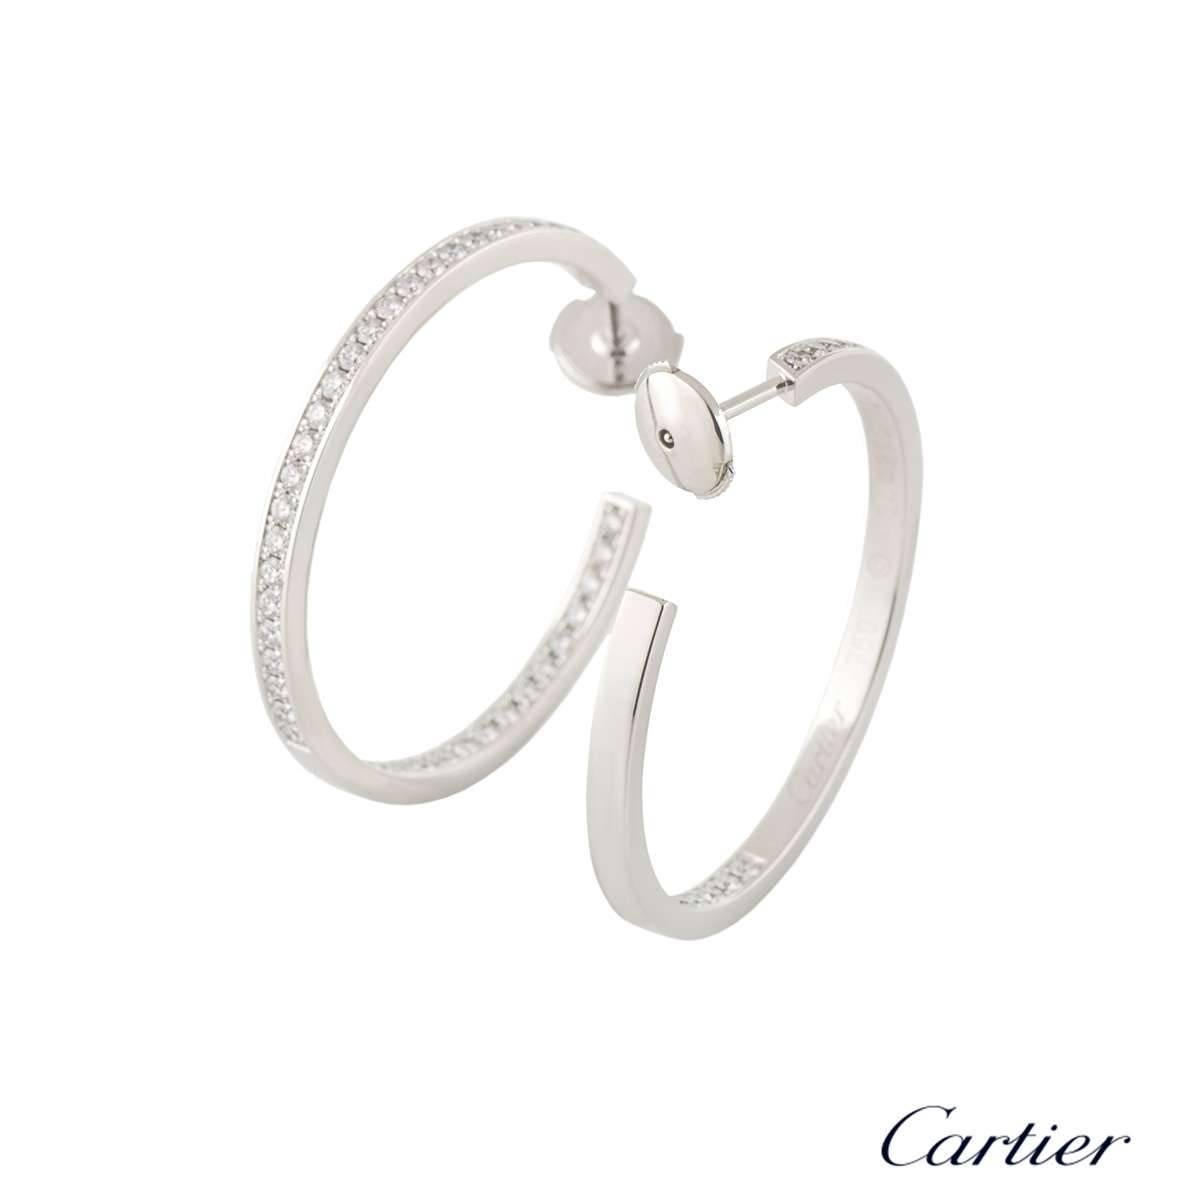 A beautiful pair of 18k white gold Cartier diamond hoop earrings. The earrings each feature 45 round brilliant cut diamonds in a pave setting with a total of approximately 1.60ct, predominantly G+ colour and VS+ clarity, both set on the inner side